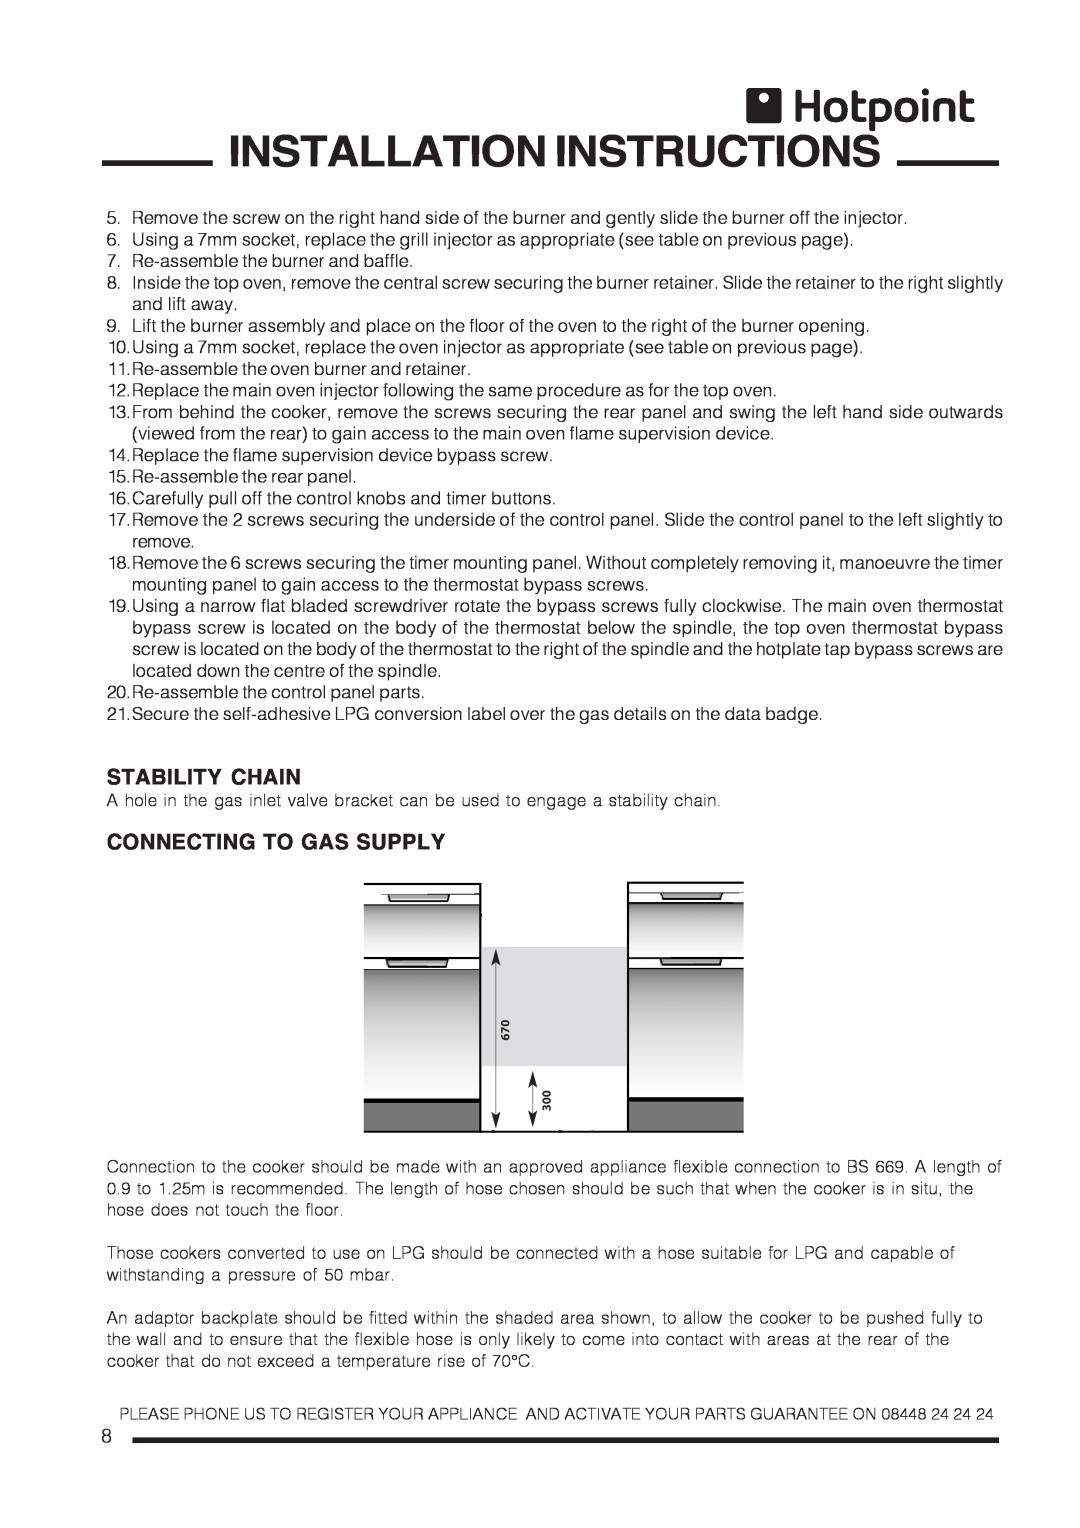 Hotpoint ch60gpcf, ch60gpxf installation instructions Stability Chain, Connecting To Gas Supply, Installation Instructions 